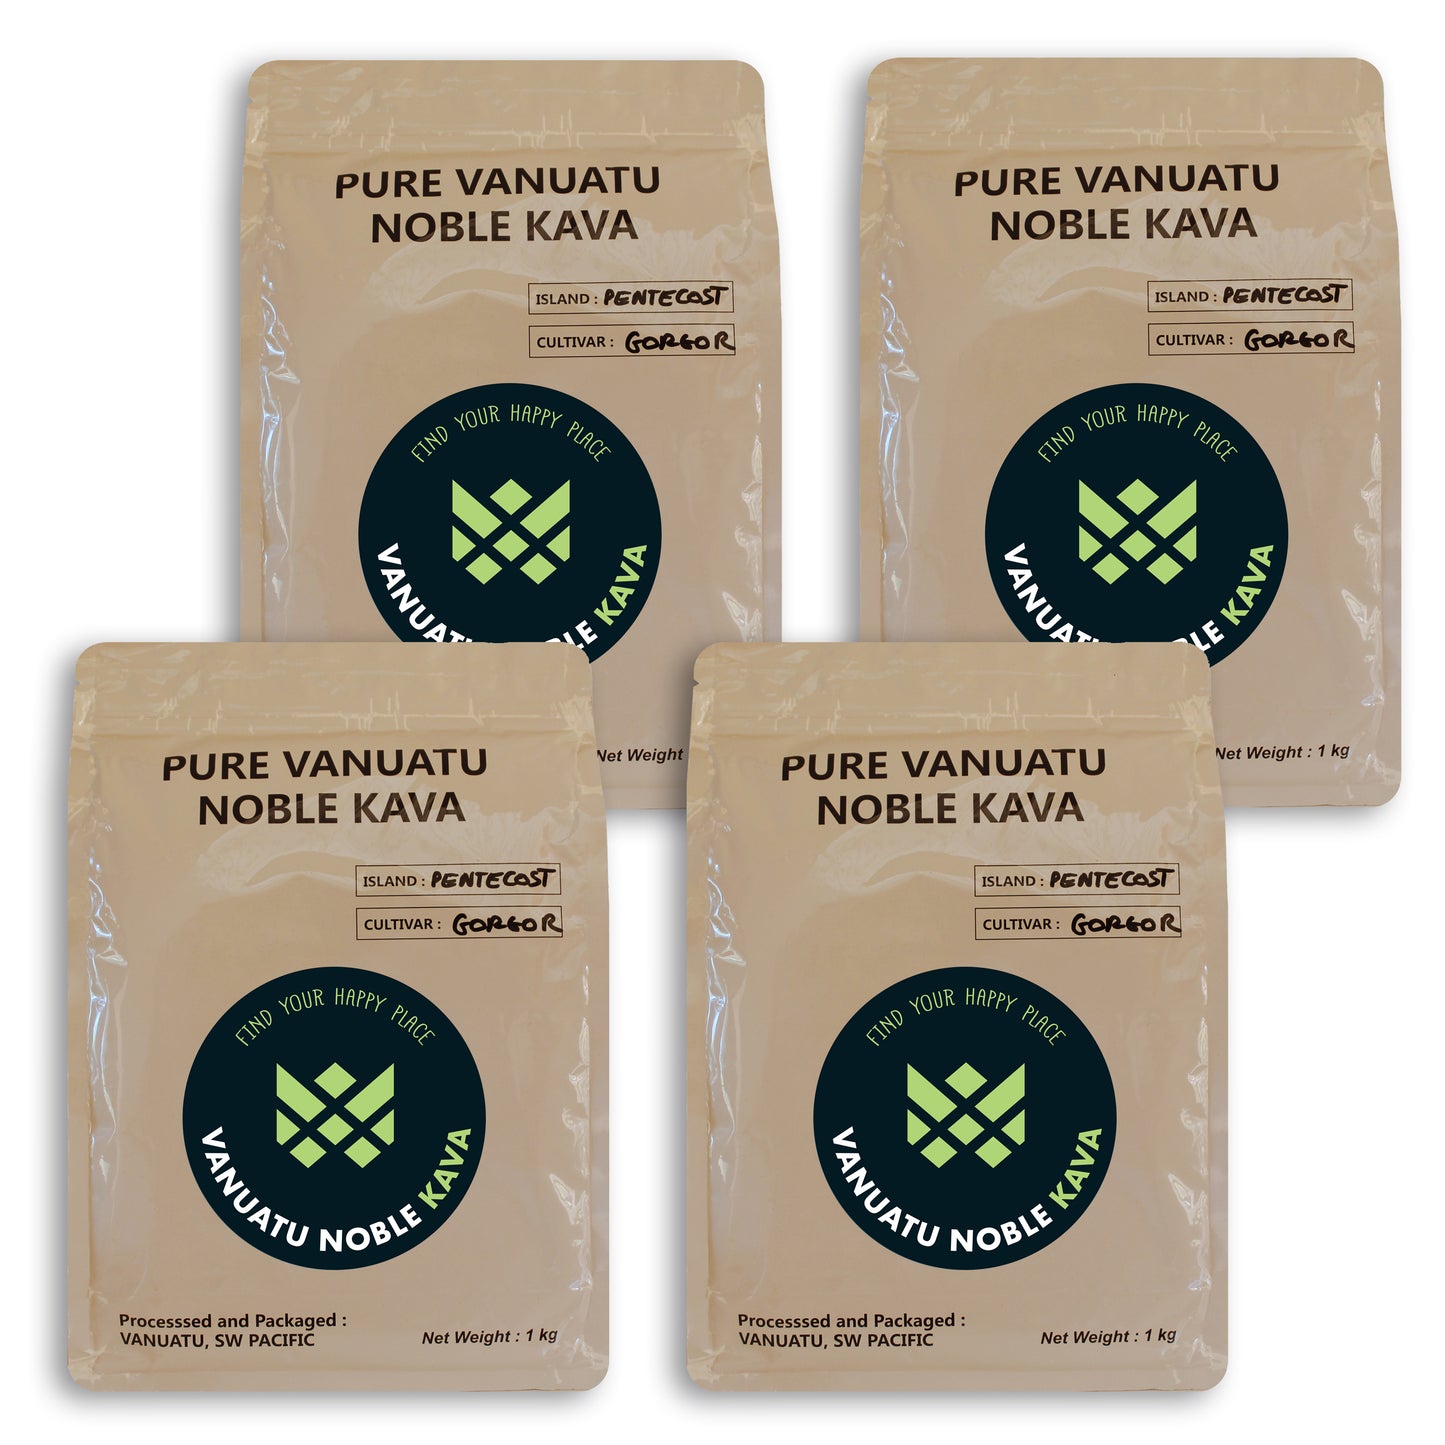 4kg PURE NOBLE KAVA FROM VANUATU - $646 - 15% Discount applied at checkout